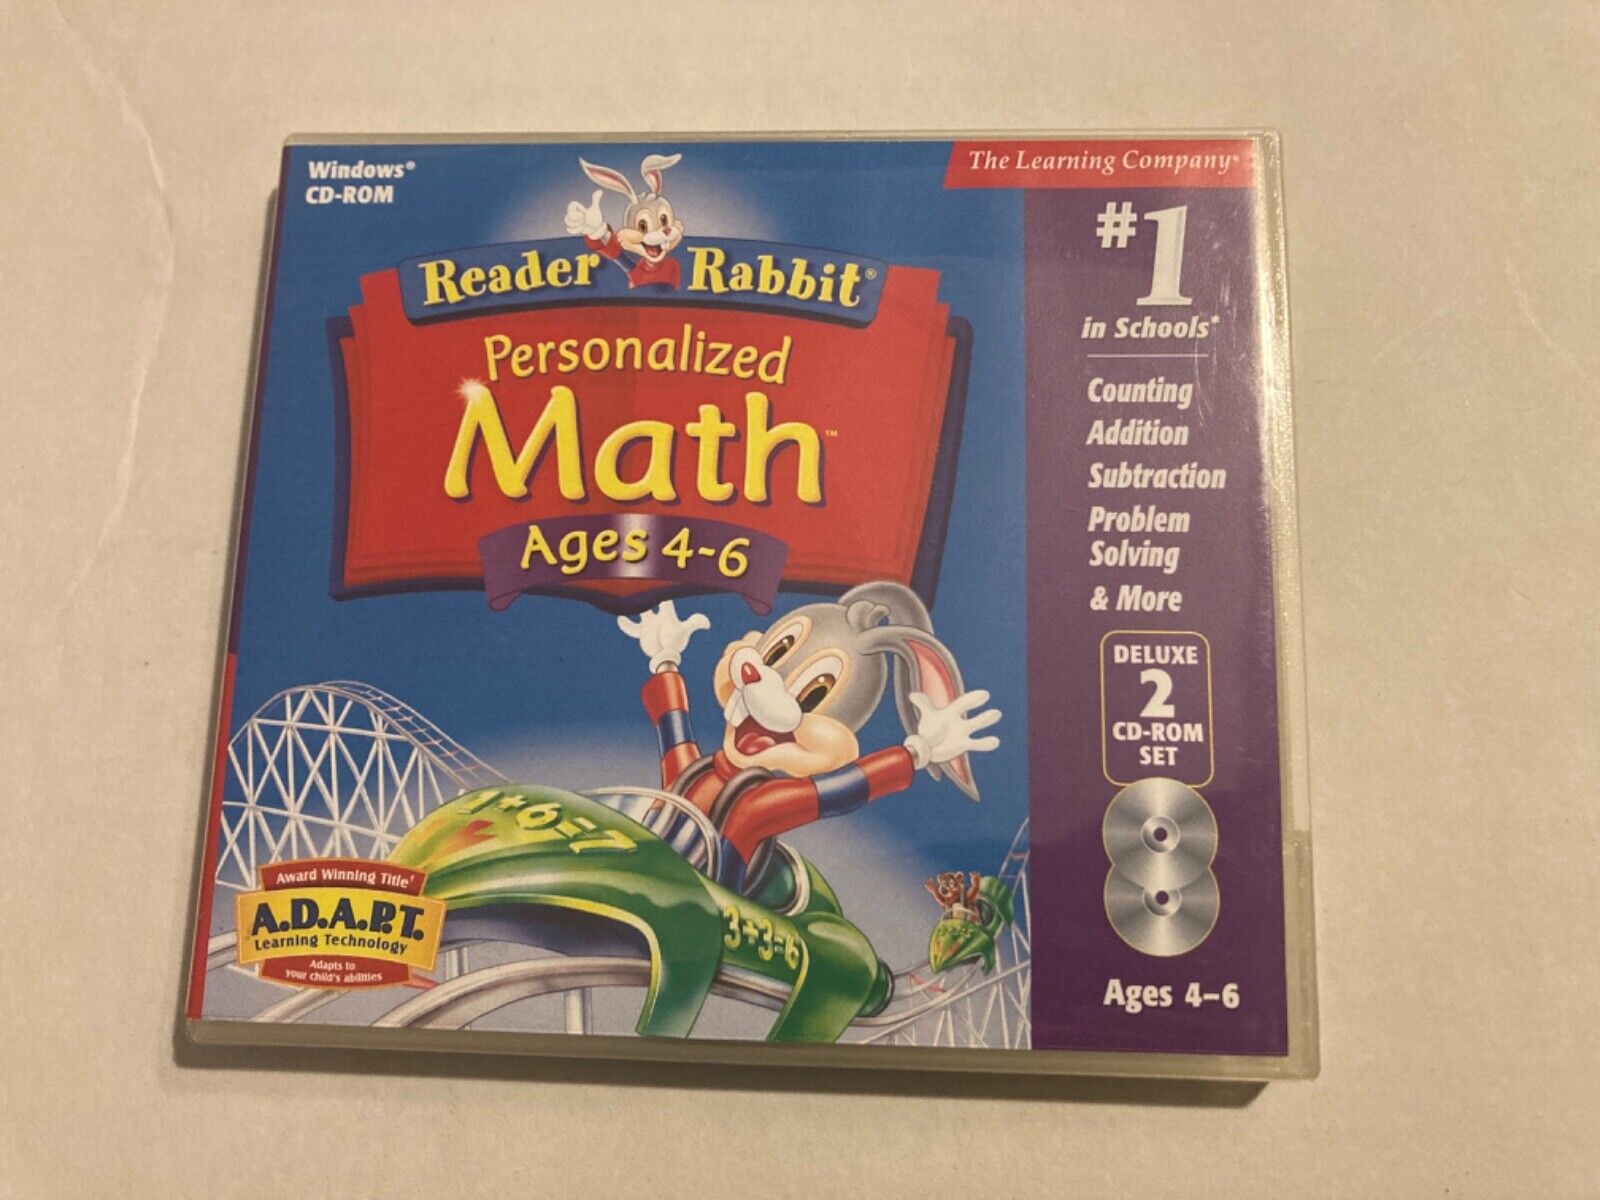 The Learning Company Reader Rabbit Personalized Math Ages 4 -6 CD-ROM/Windows 